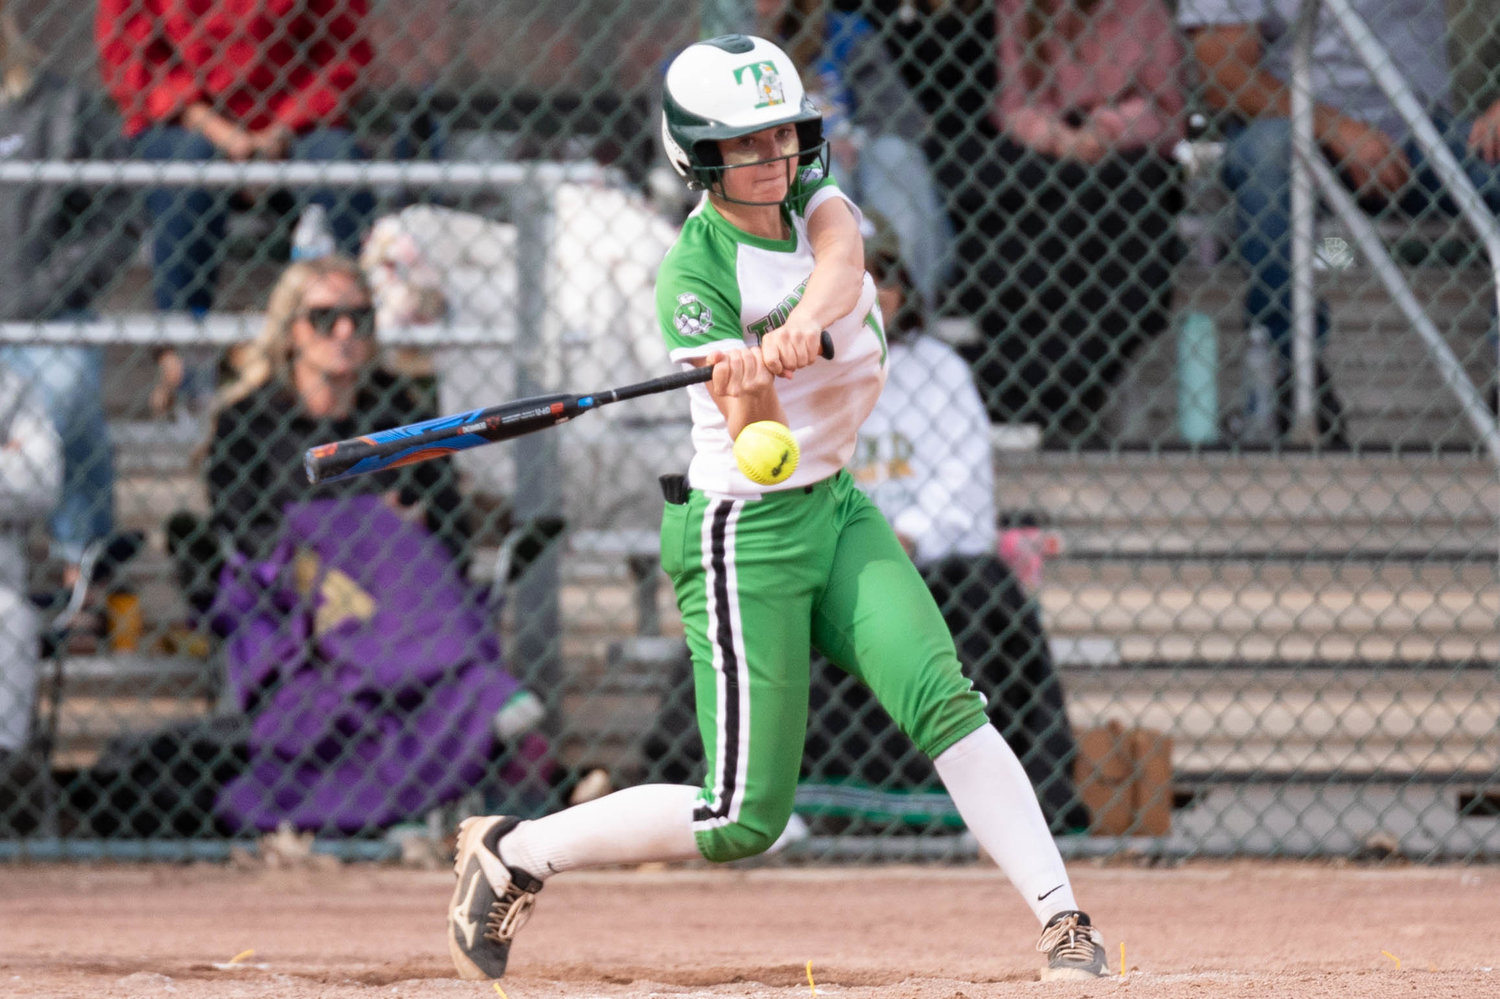 Tumwater's Aly Waltermeyer makes contact with a pitch against Lynden in the 2A State Quarterfinals at Carlon Park in Selah May 27.